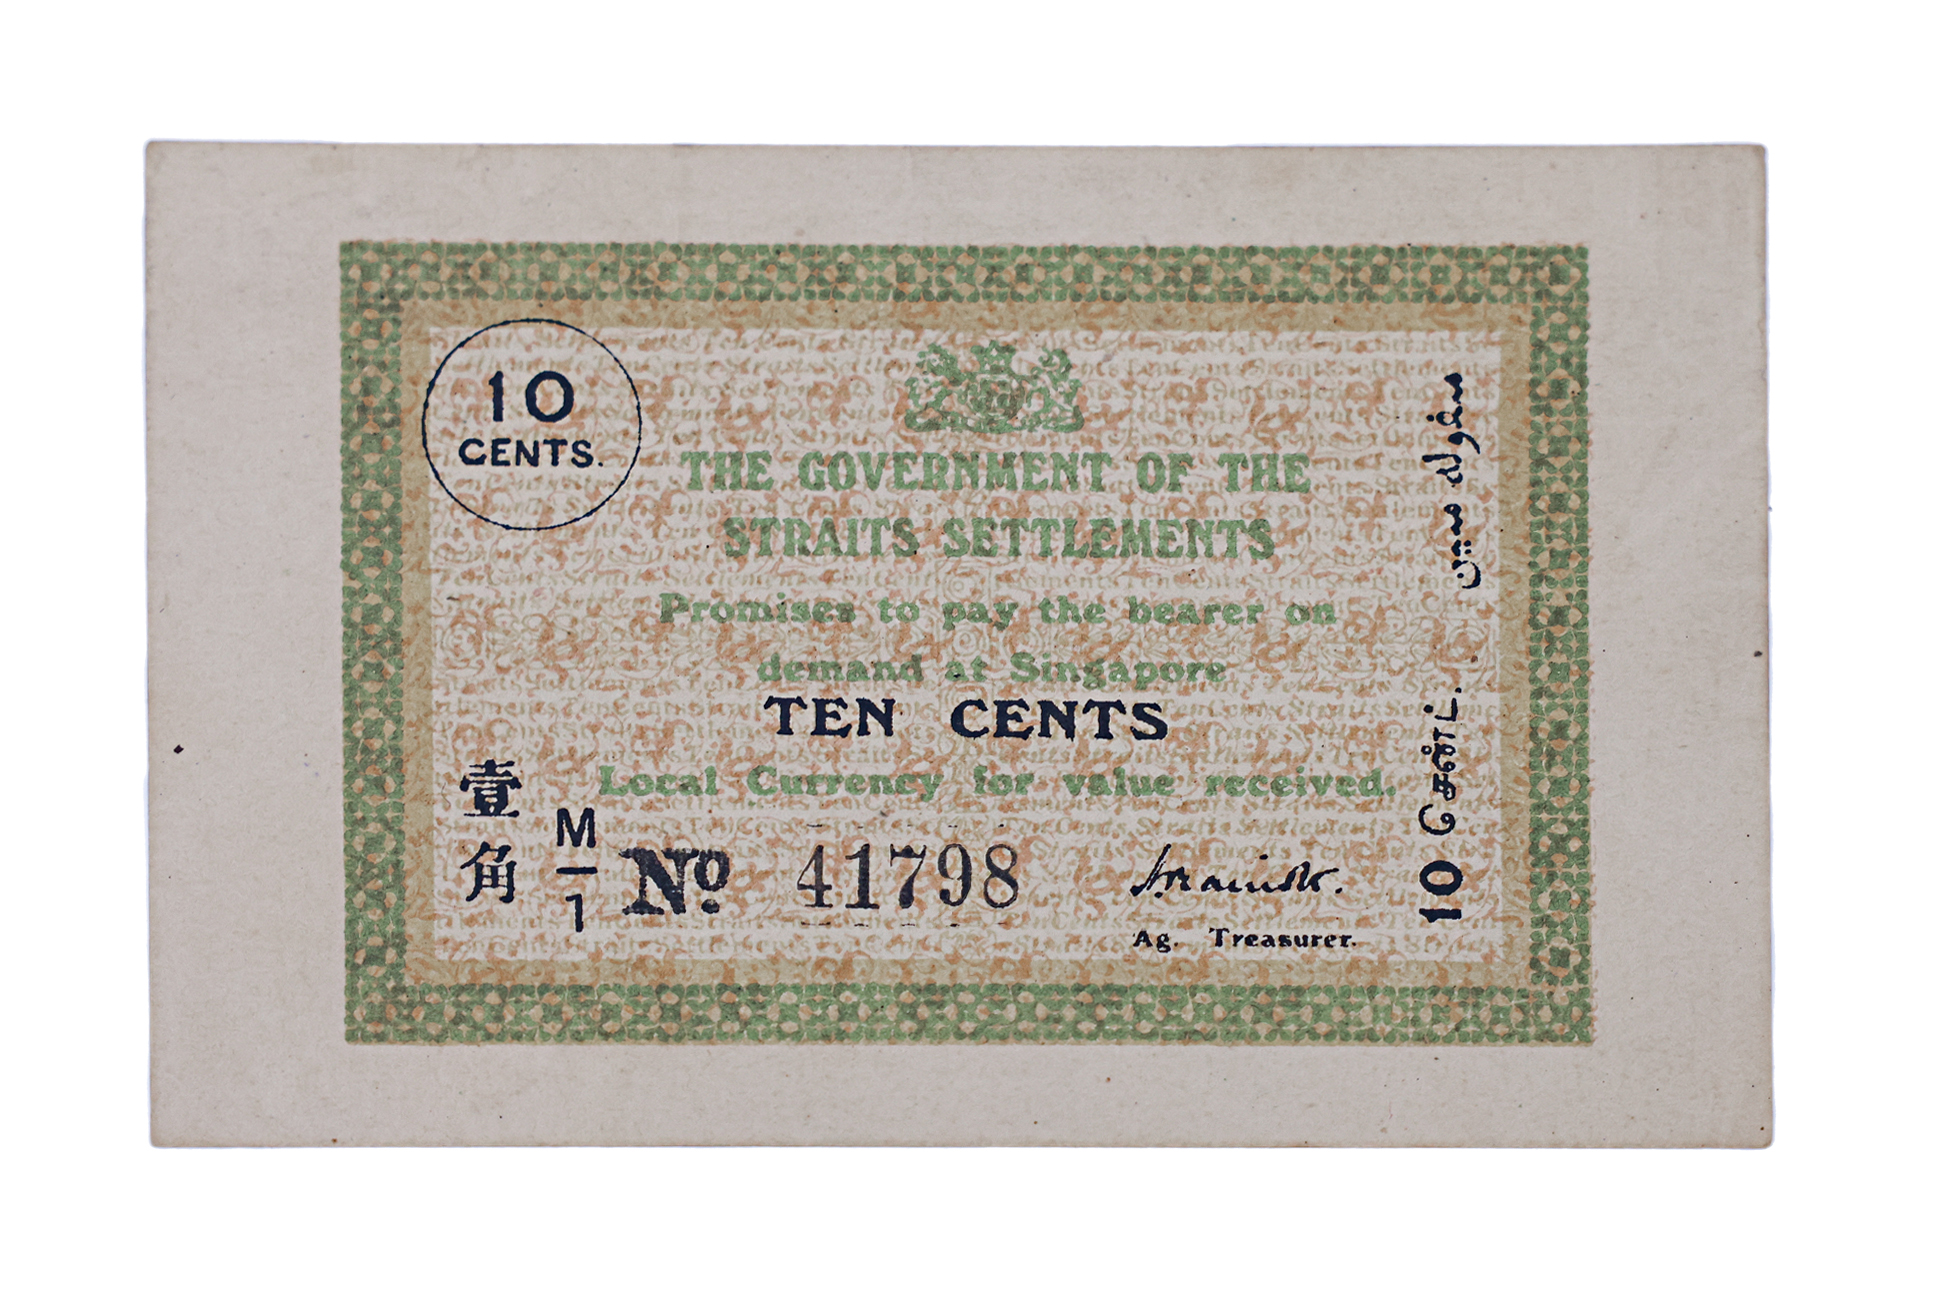 STRAITS SETTLEMENTS EMERGENCY ISSUE 10 CENTS